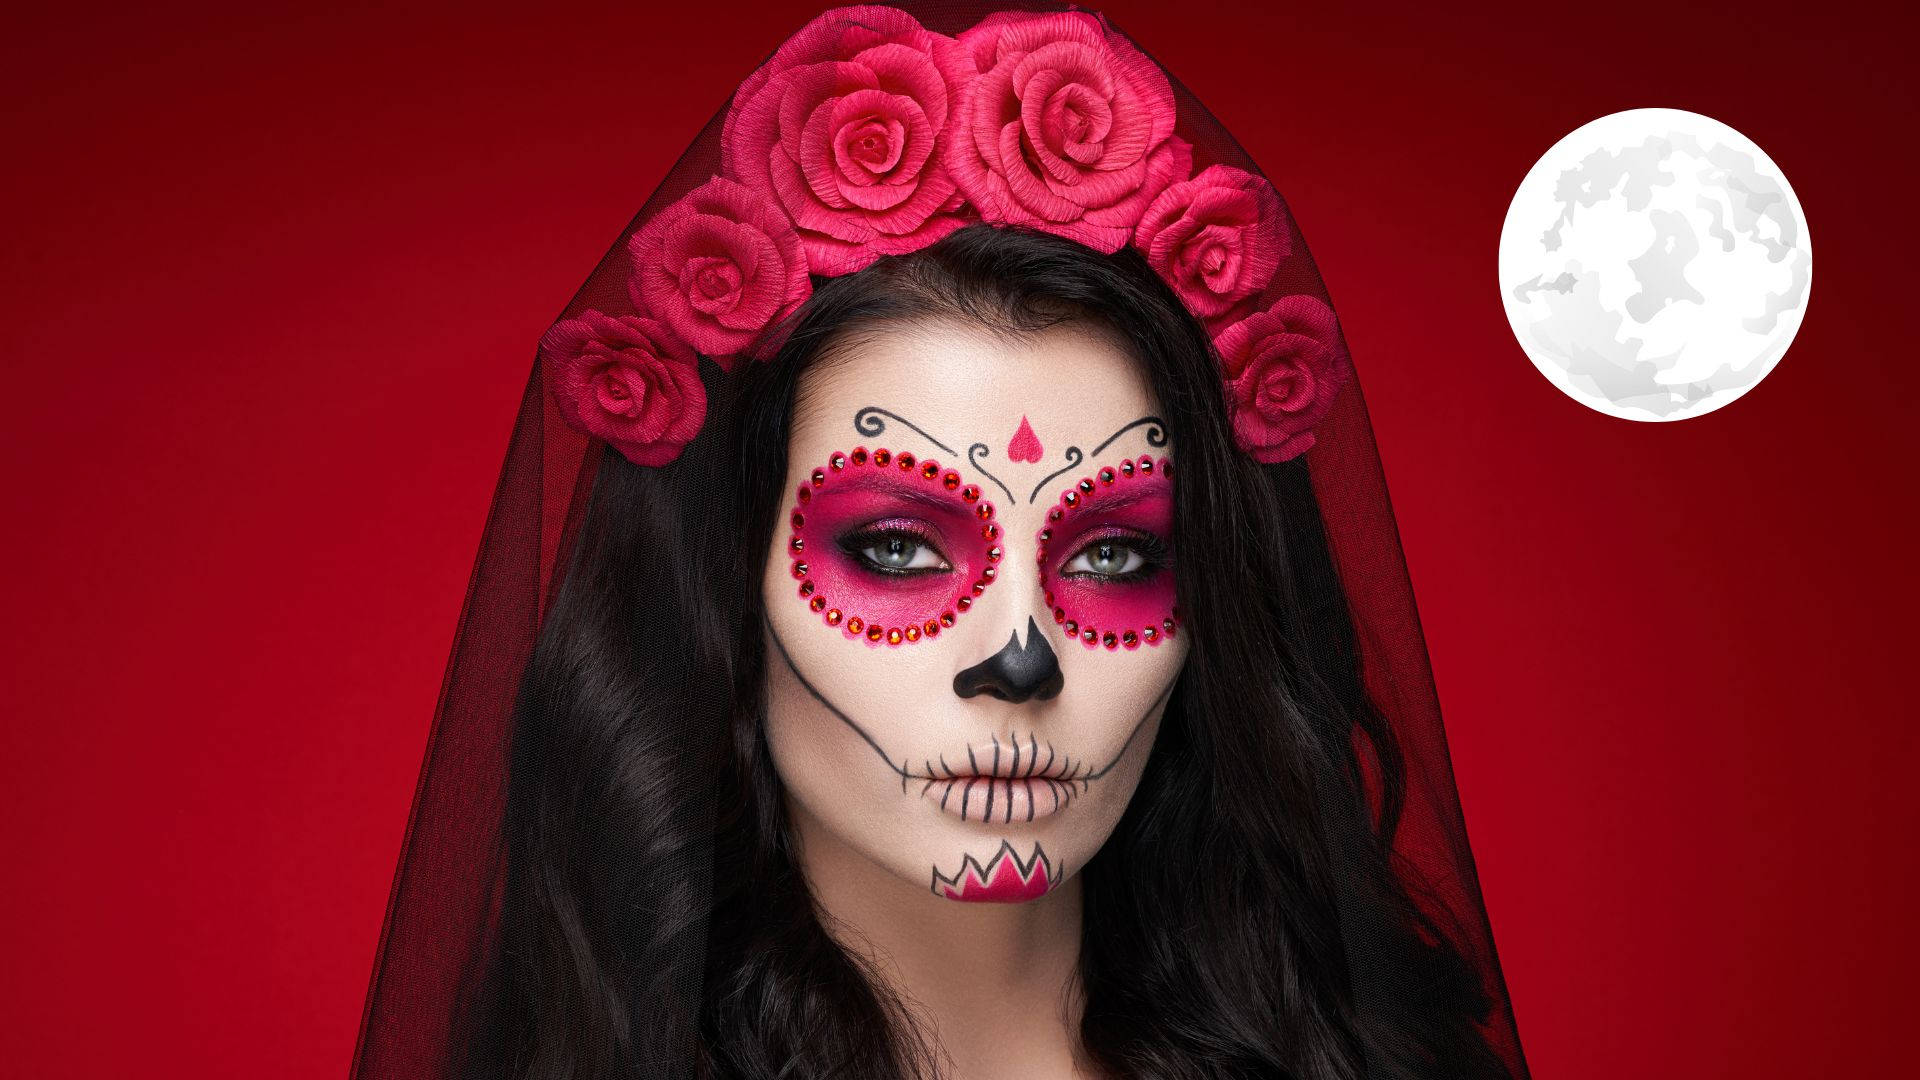 Download A Woman With Sugar Skull Makeup And Roses On Her Face ...